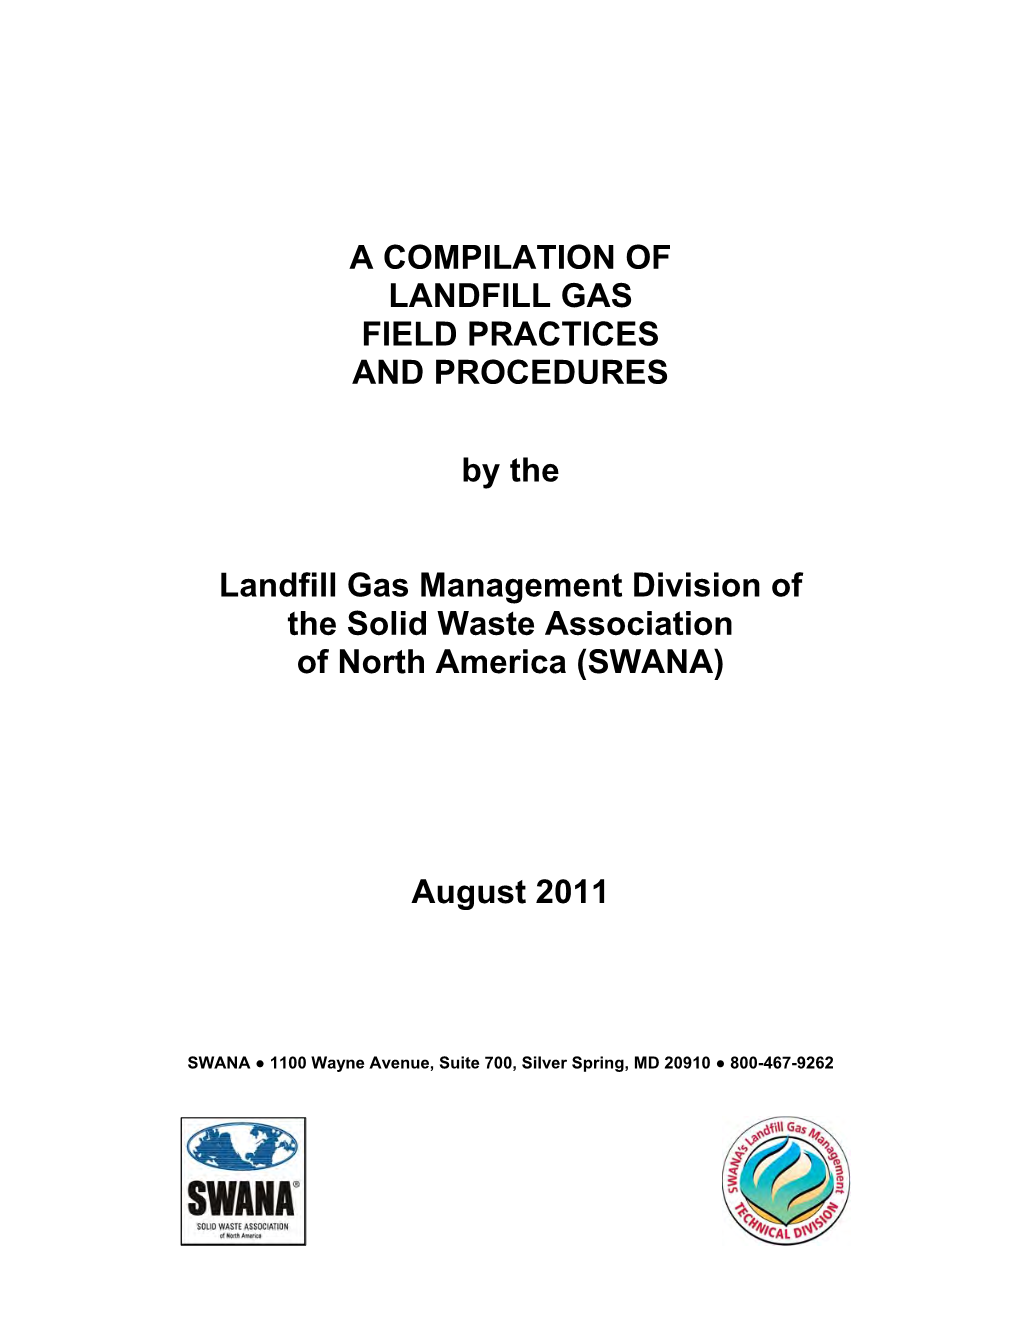 A Compilation of Landfill Gas Field Practices and Procedures